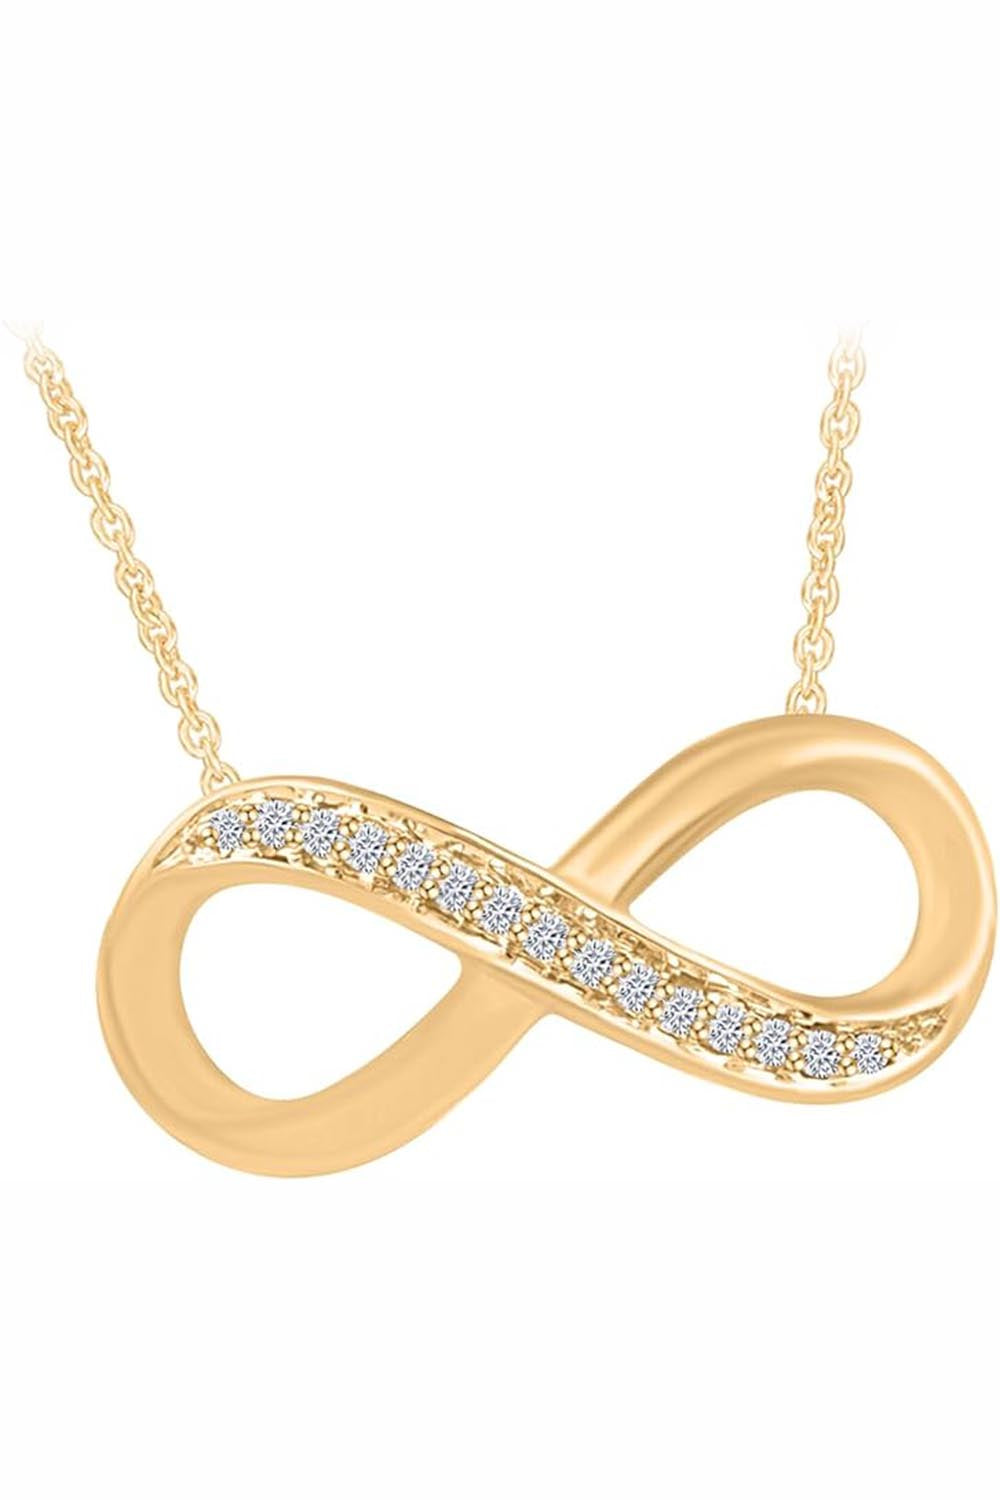 Yellow Gold Color Yaathi Infinity Necklace, Women's Pendant Necklace